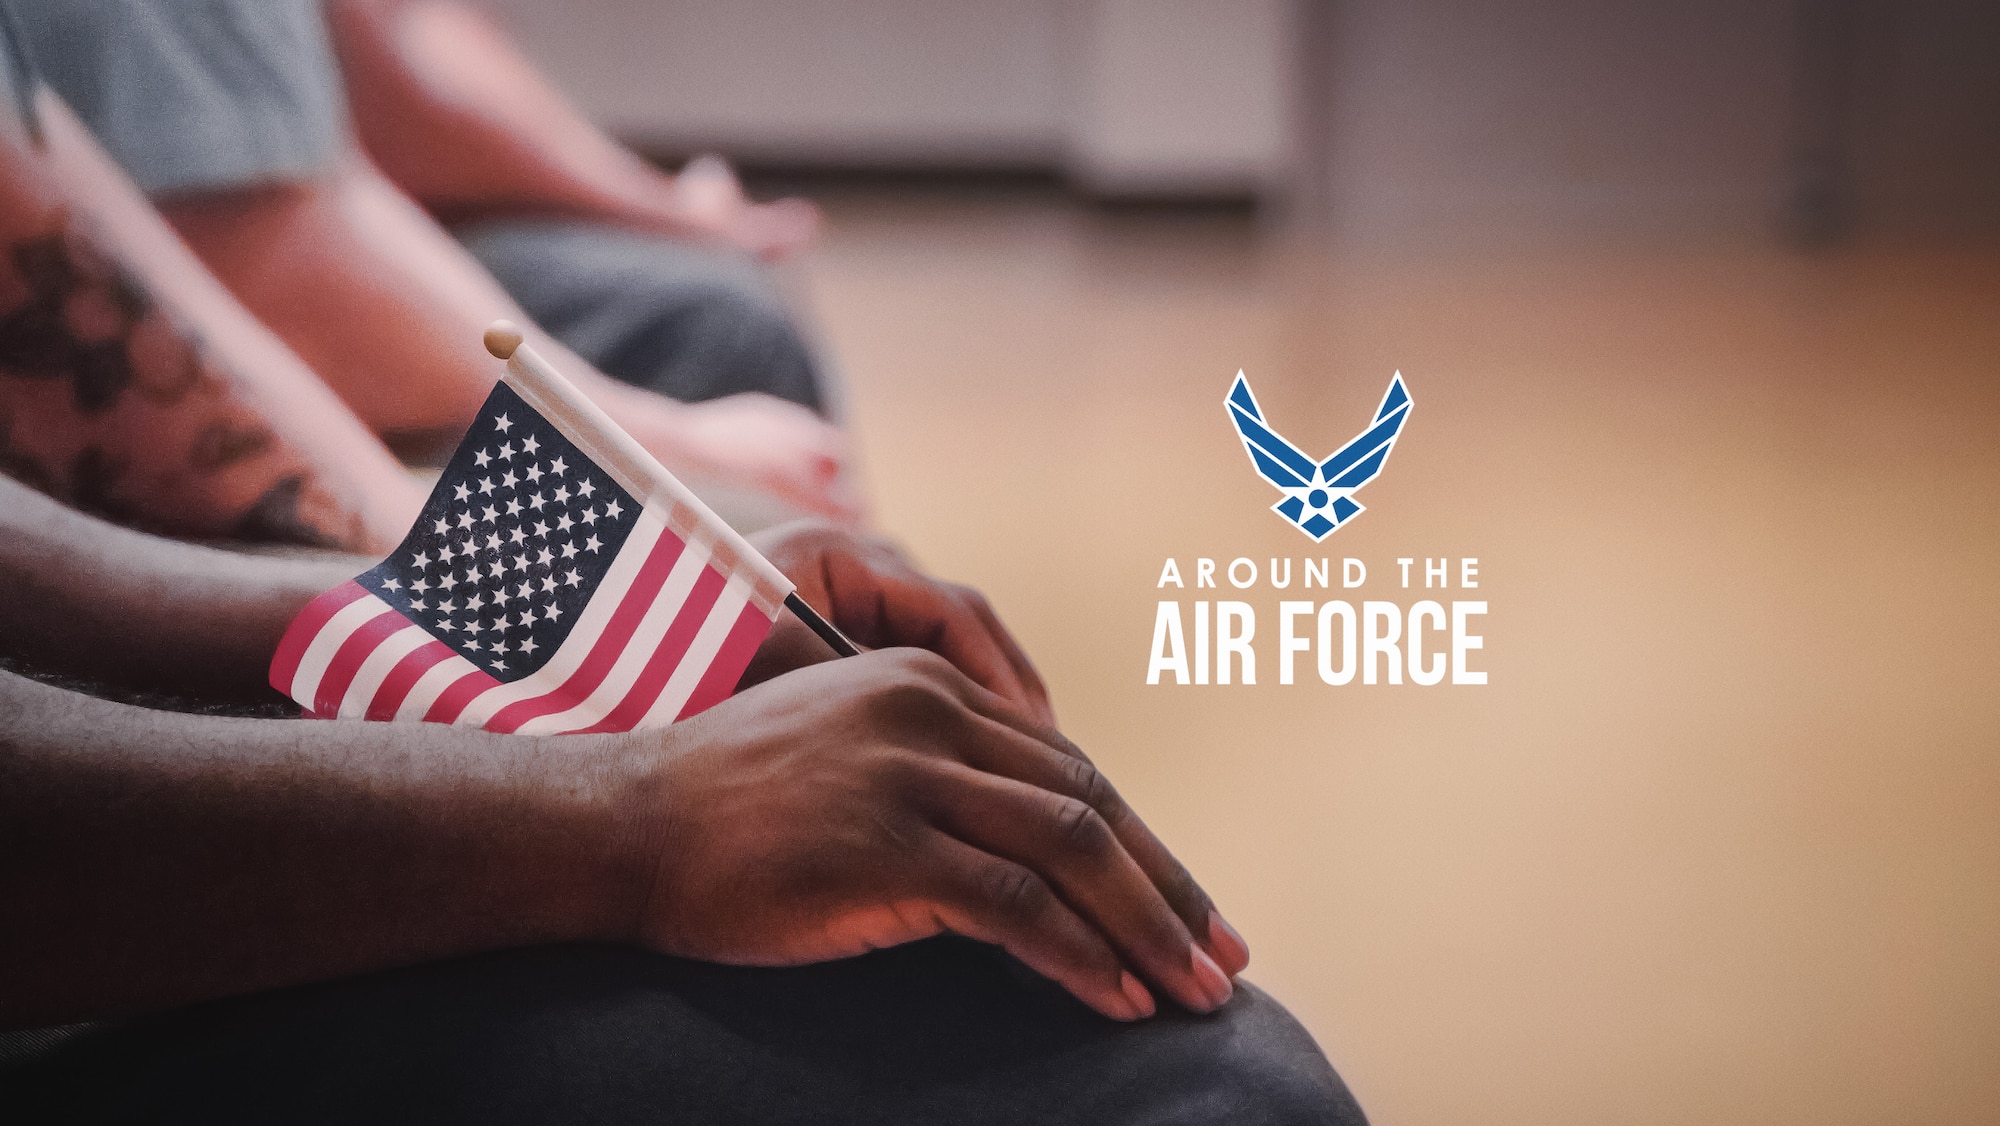 Around the Air Force